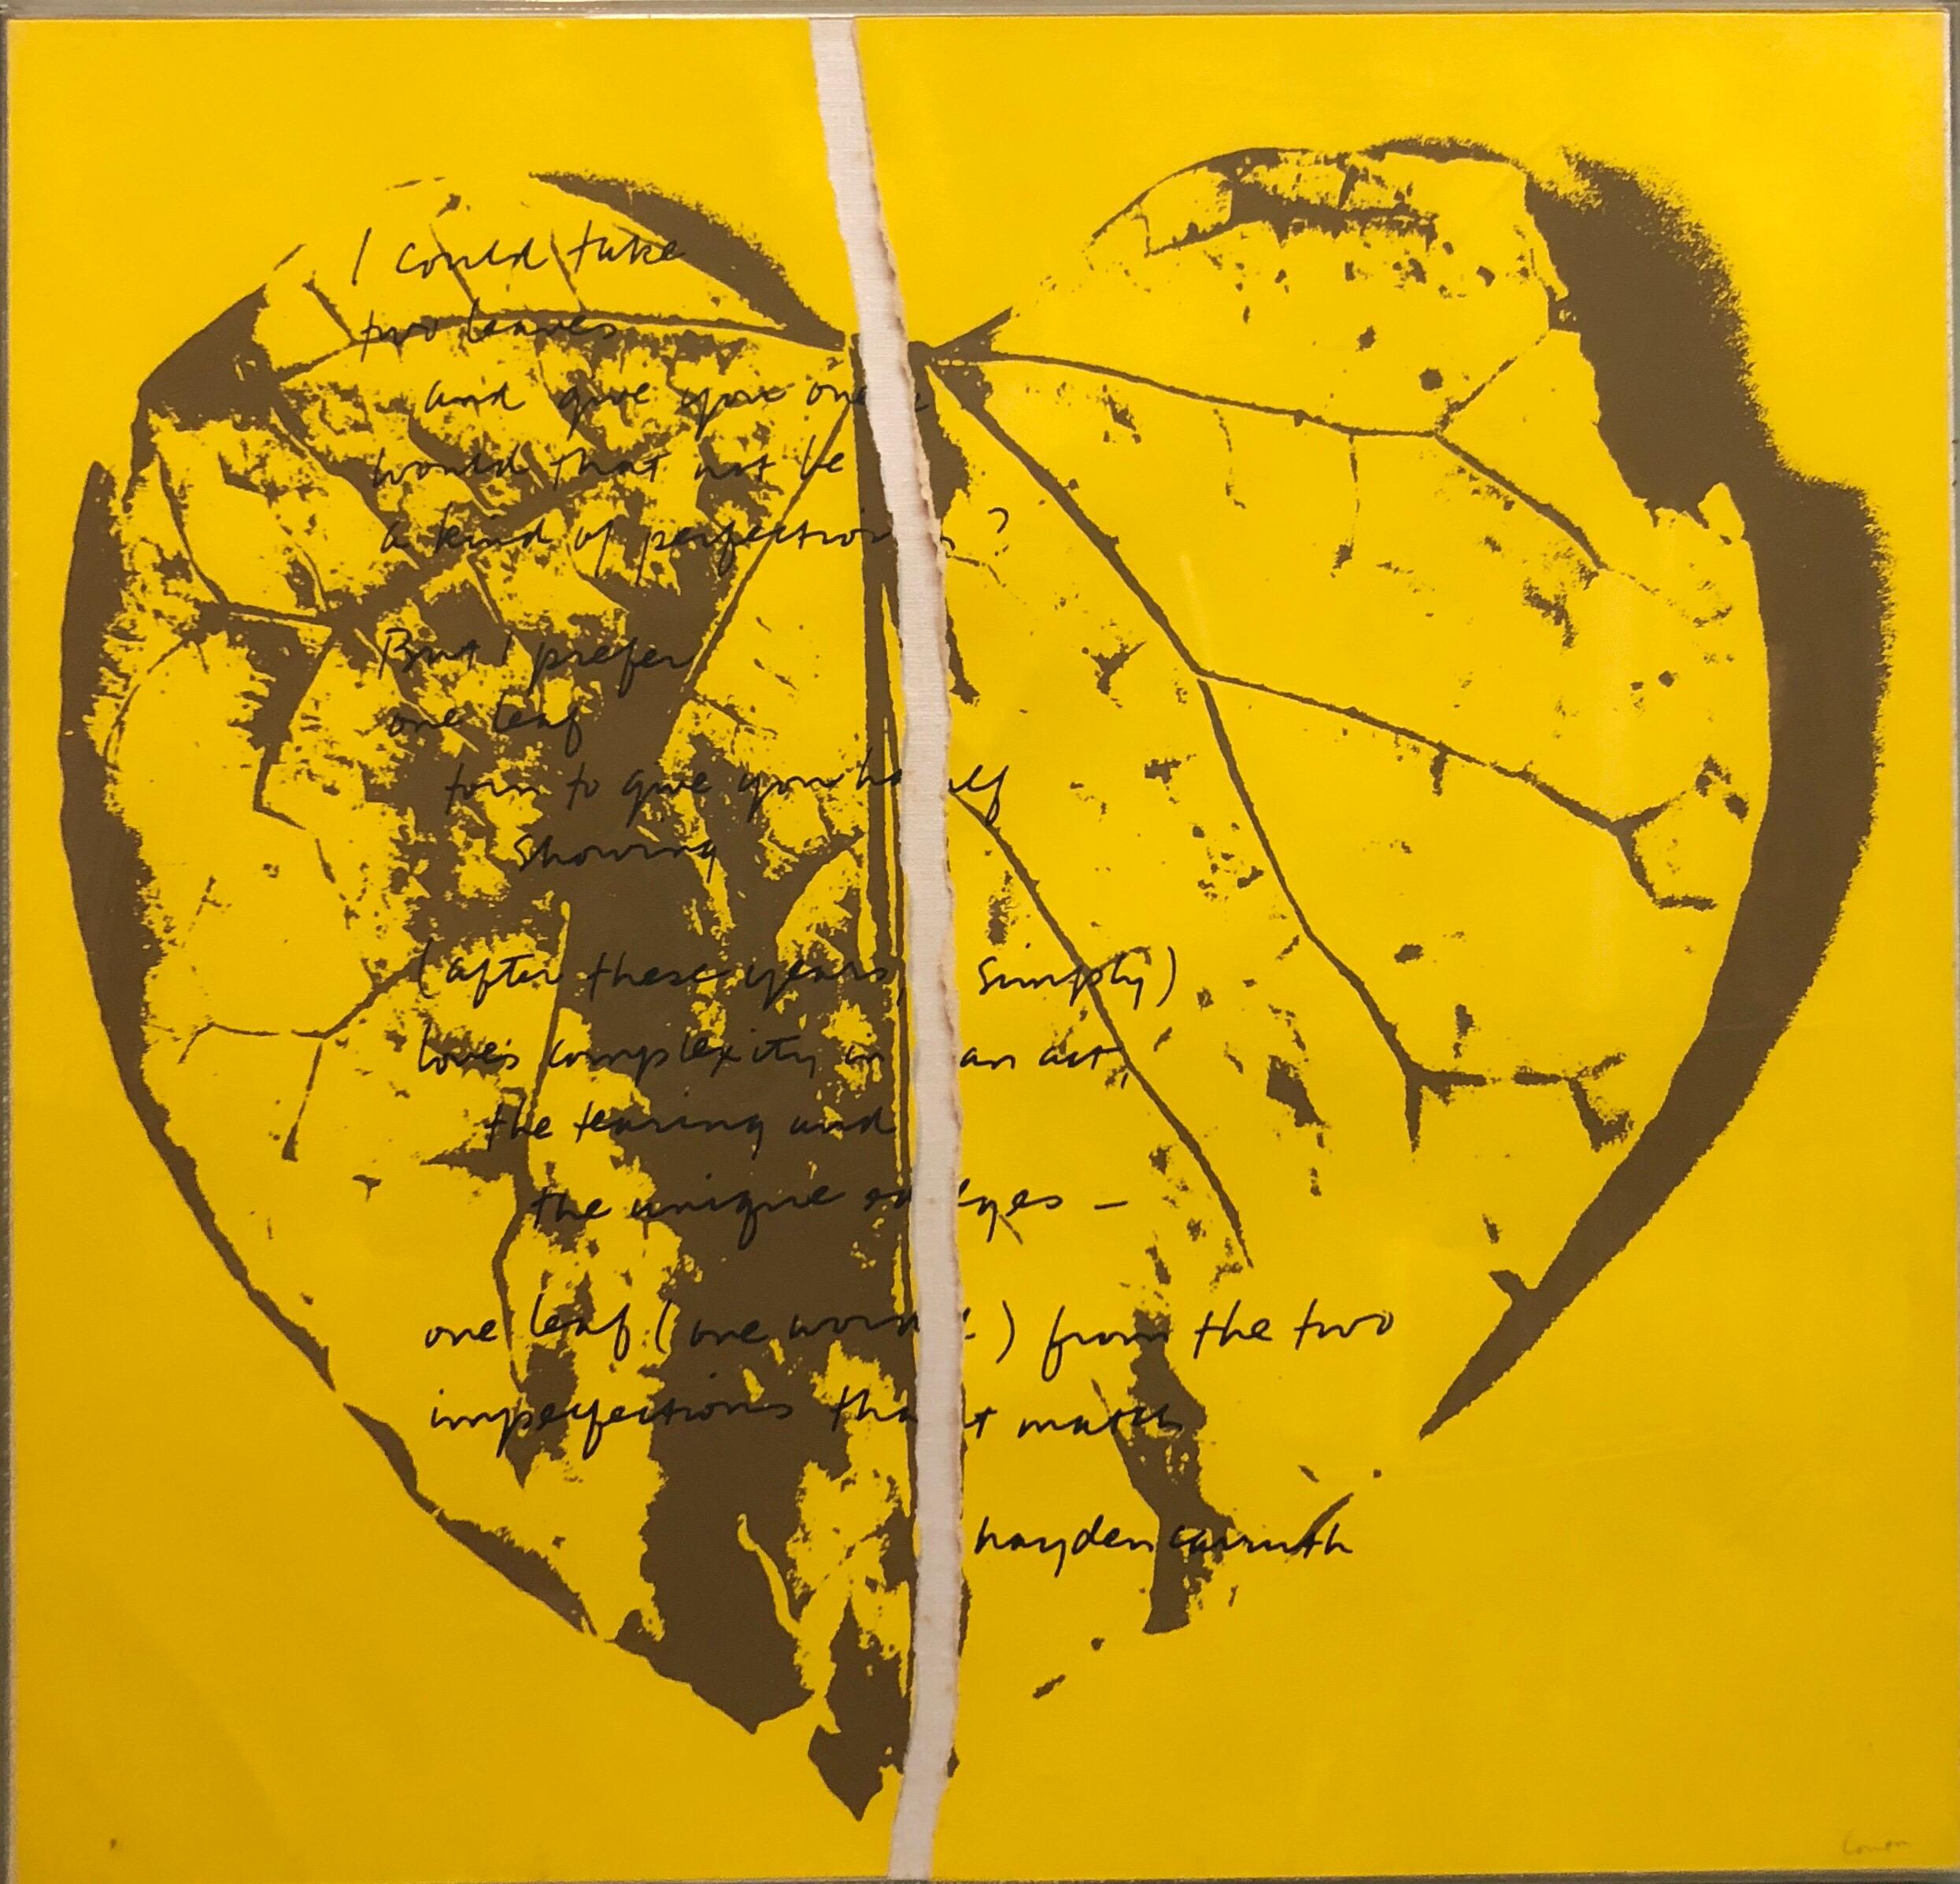  Love's Complexity, 1968. Lithograph in permanent collection of Brooklyn Museum and Harvard Museum, This one is unique in that it is torn and collaged and framed thus. it is hand signed: l.r.: Corita
Printed poem text reads: 